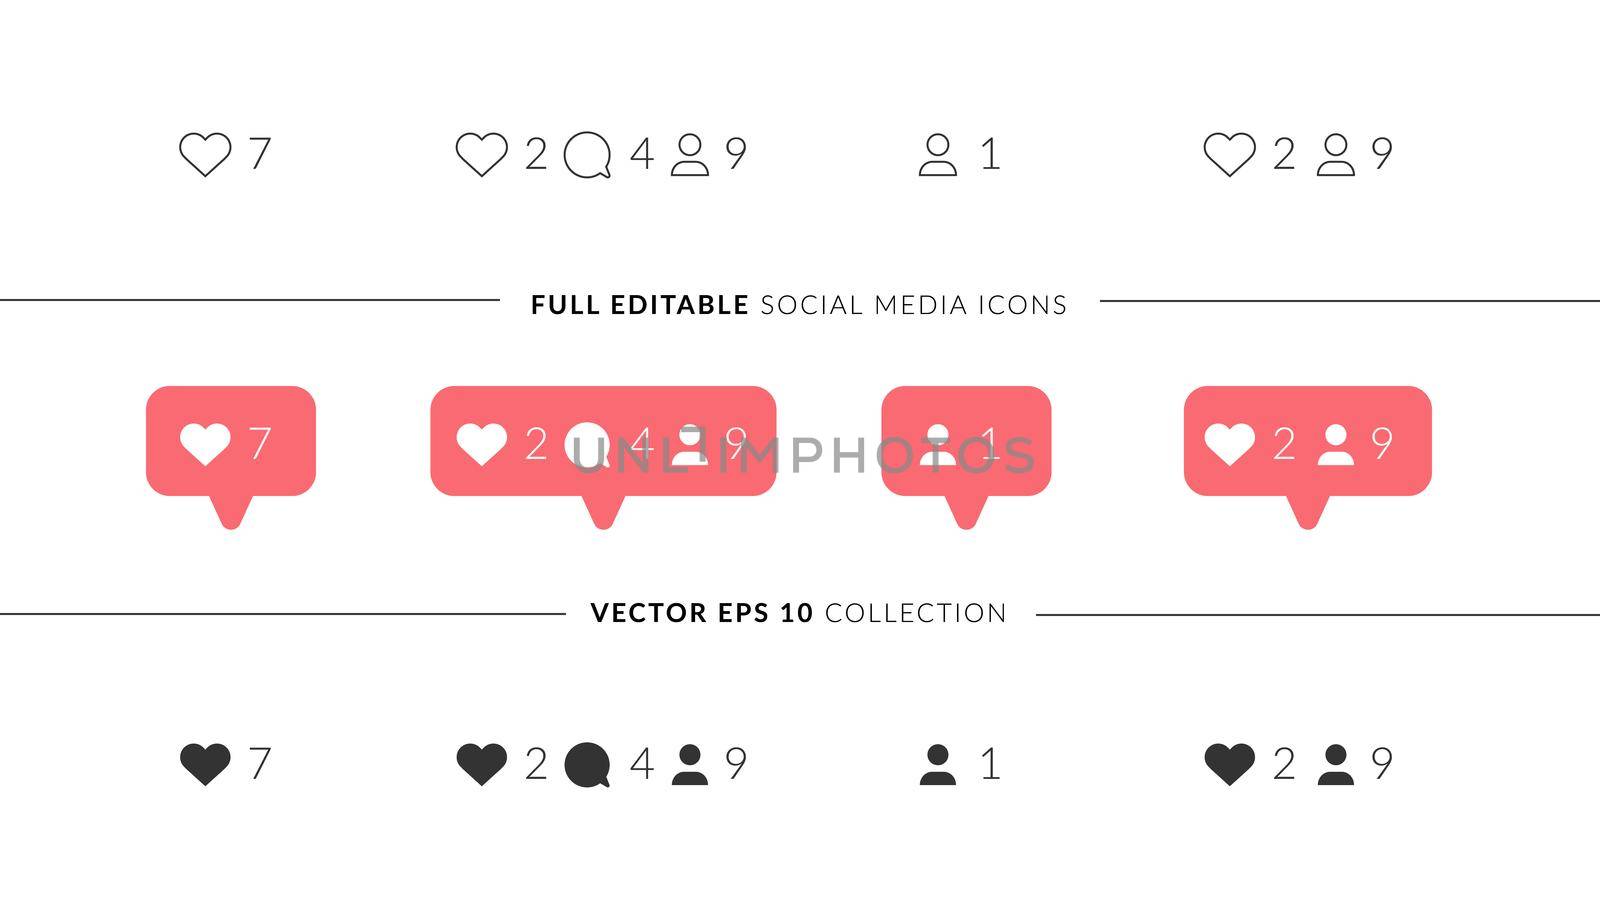 Vector Perfect Icons For Social Media Design. Elegant Social Media Icons With 3 different Styles. Like, Share, Comment, Repost.